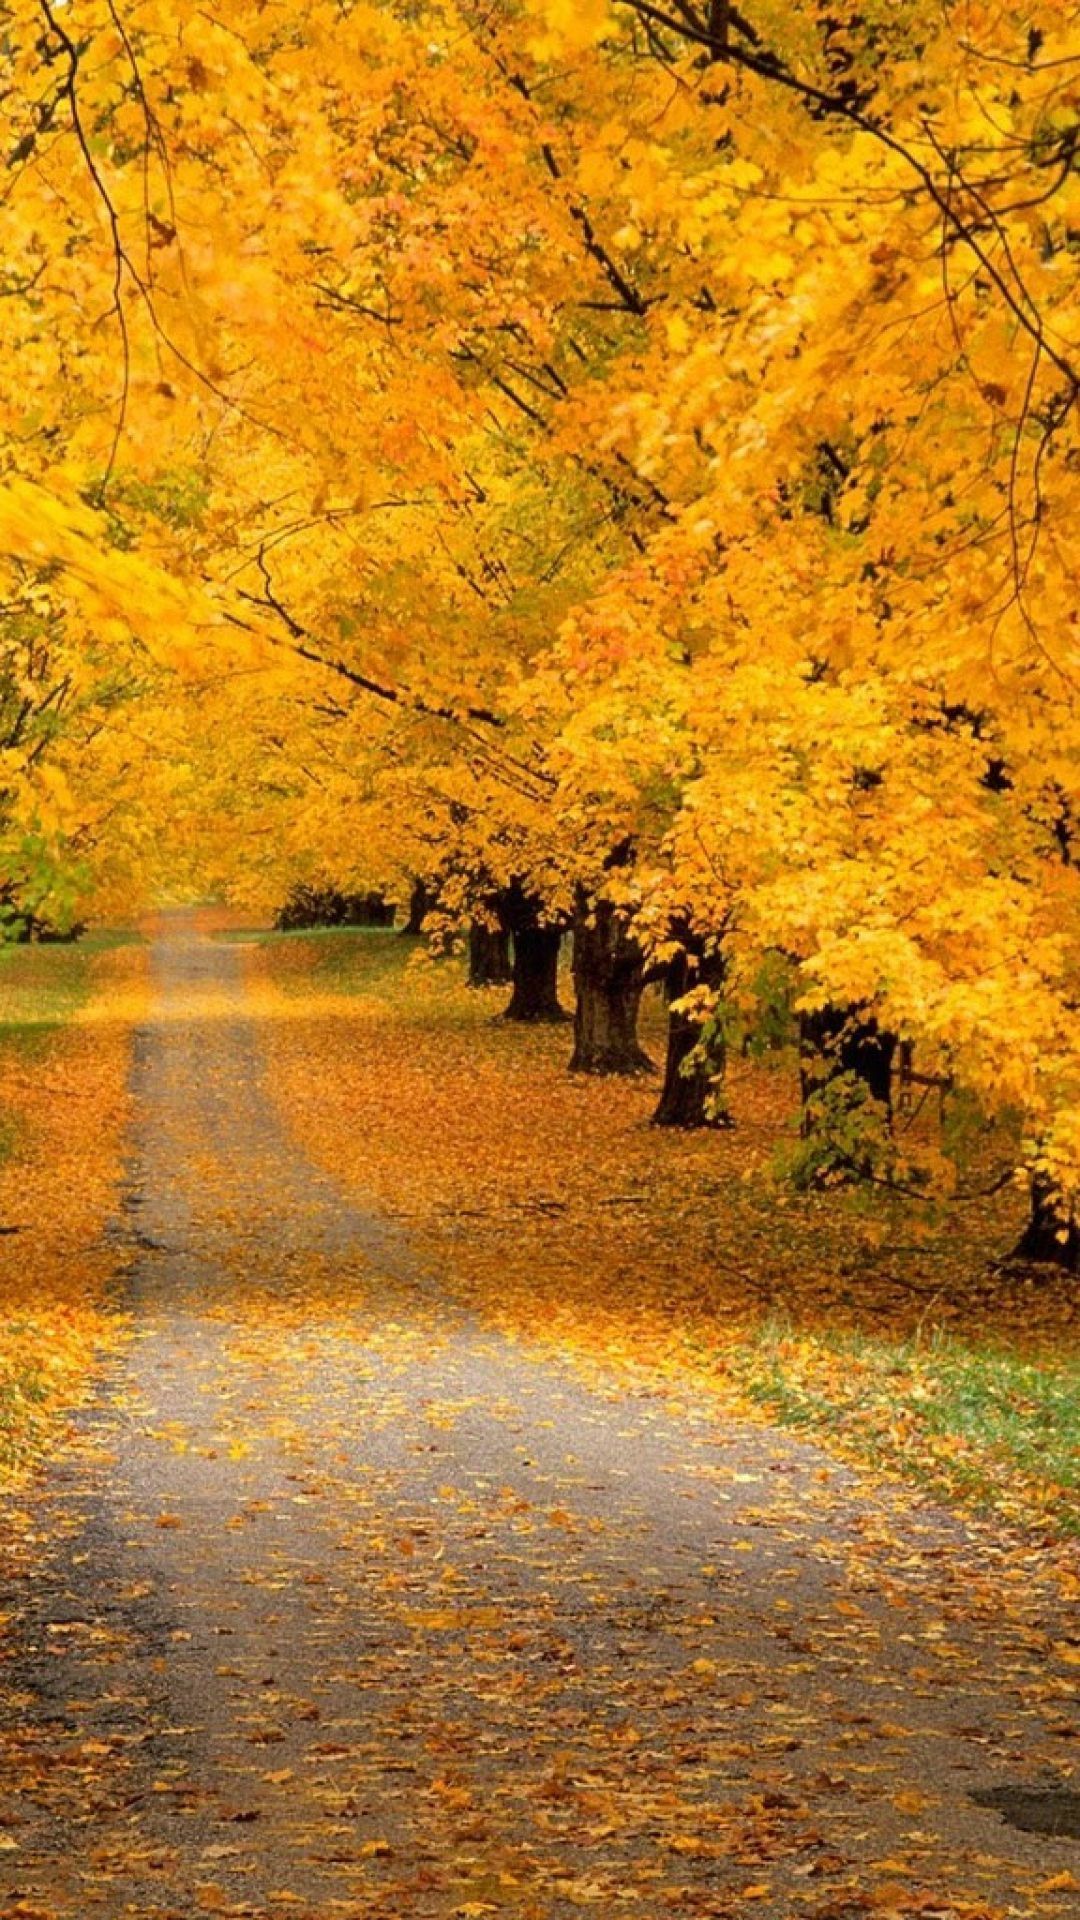 trees, park, autumn, leaves, yellow, track. Fall picture, Autumn scenes, Scenery